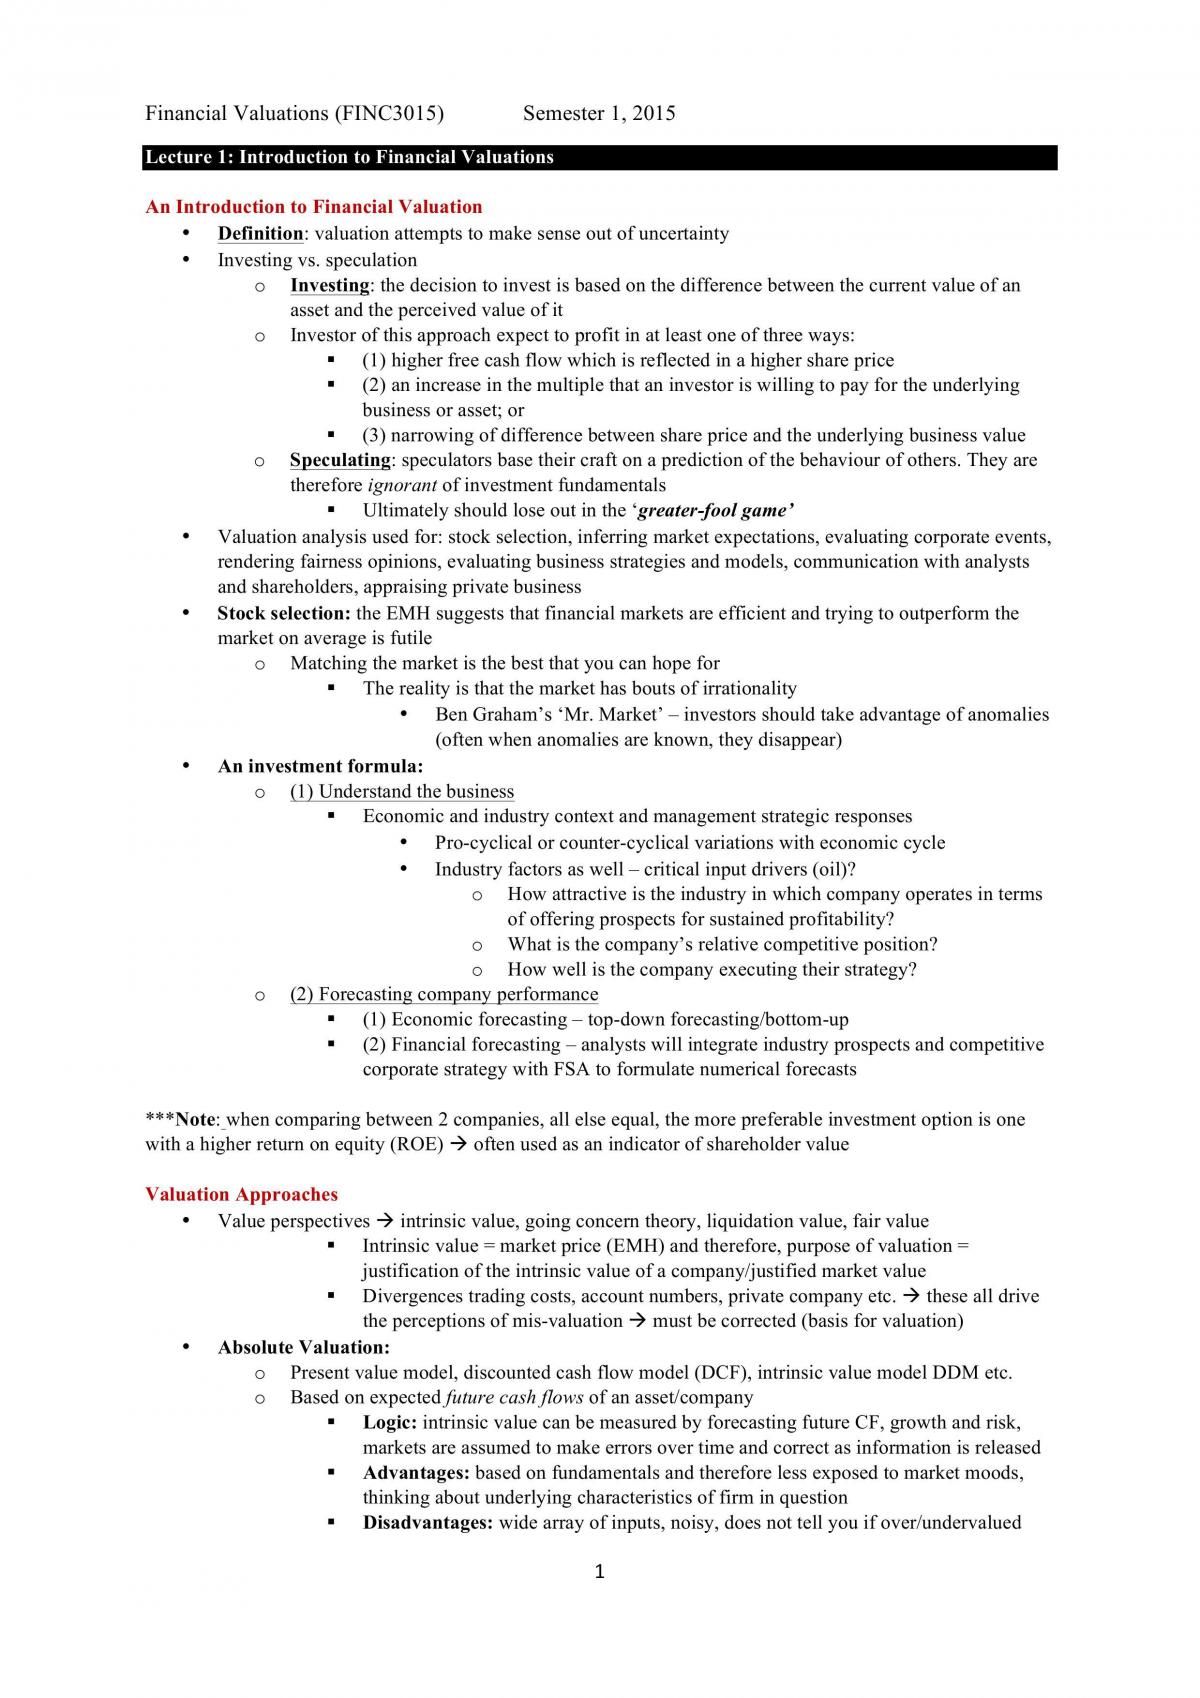 FINC3015 Full Course Notes (HD Student) - Page 1